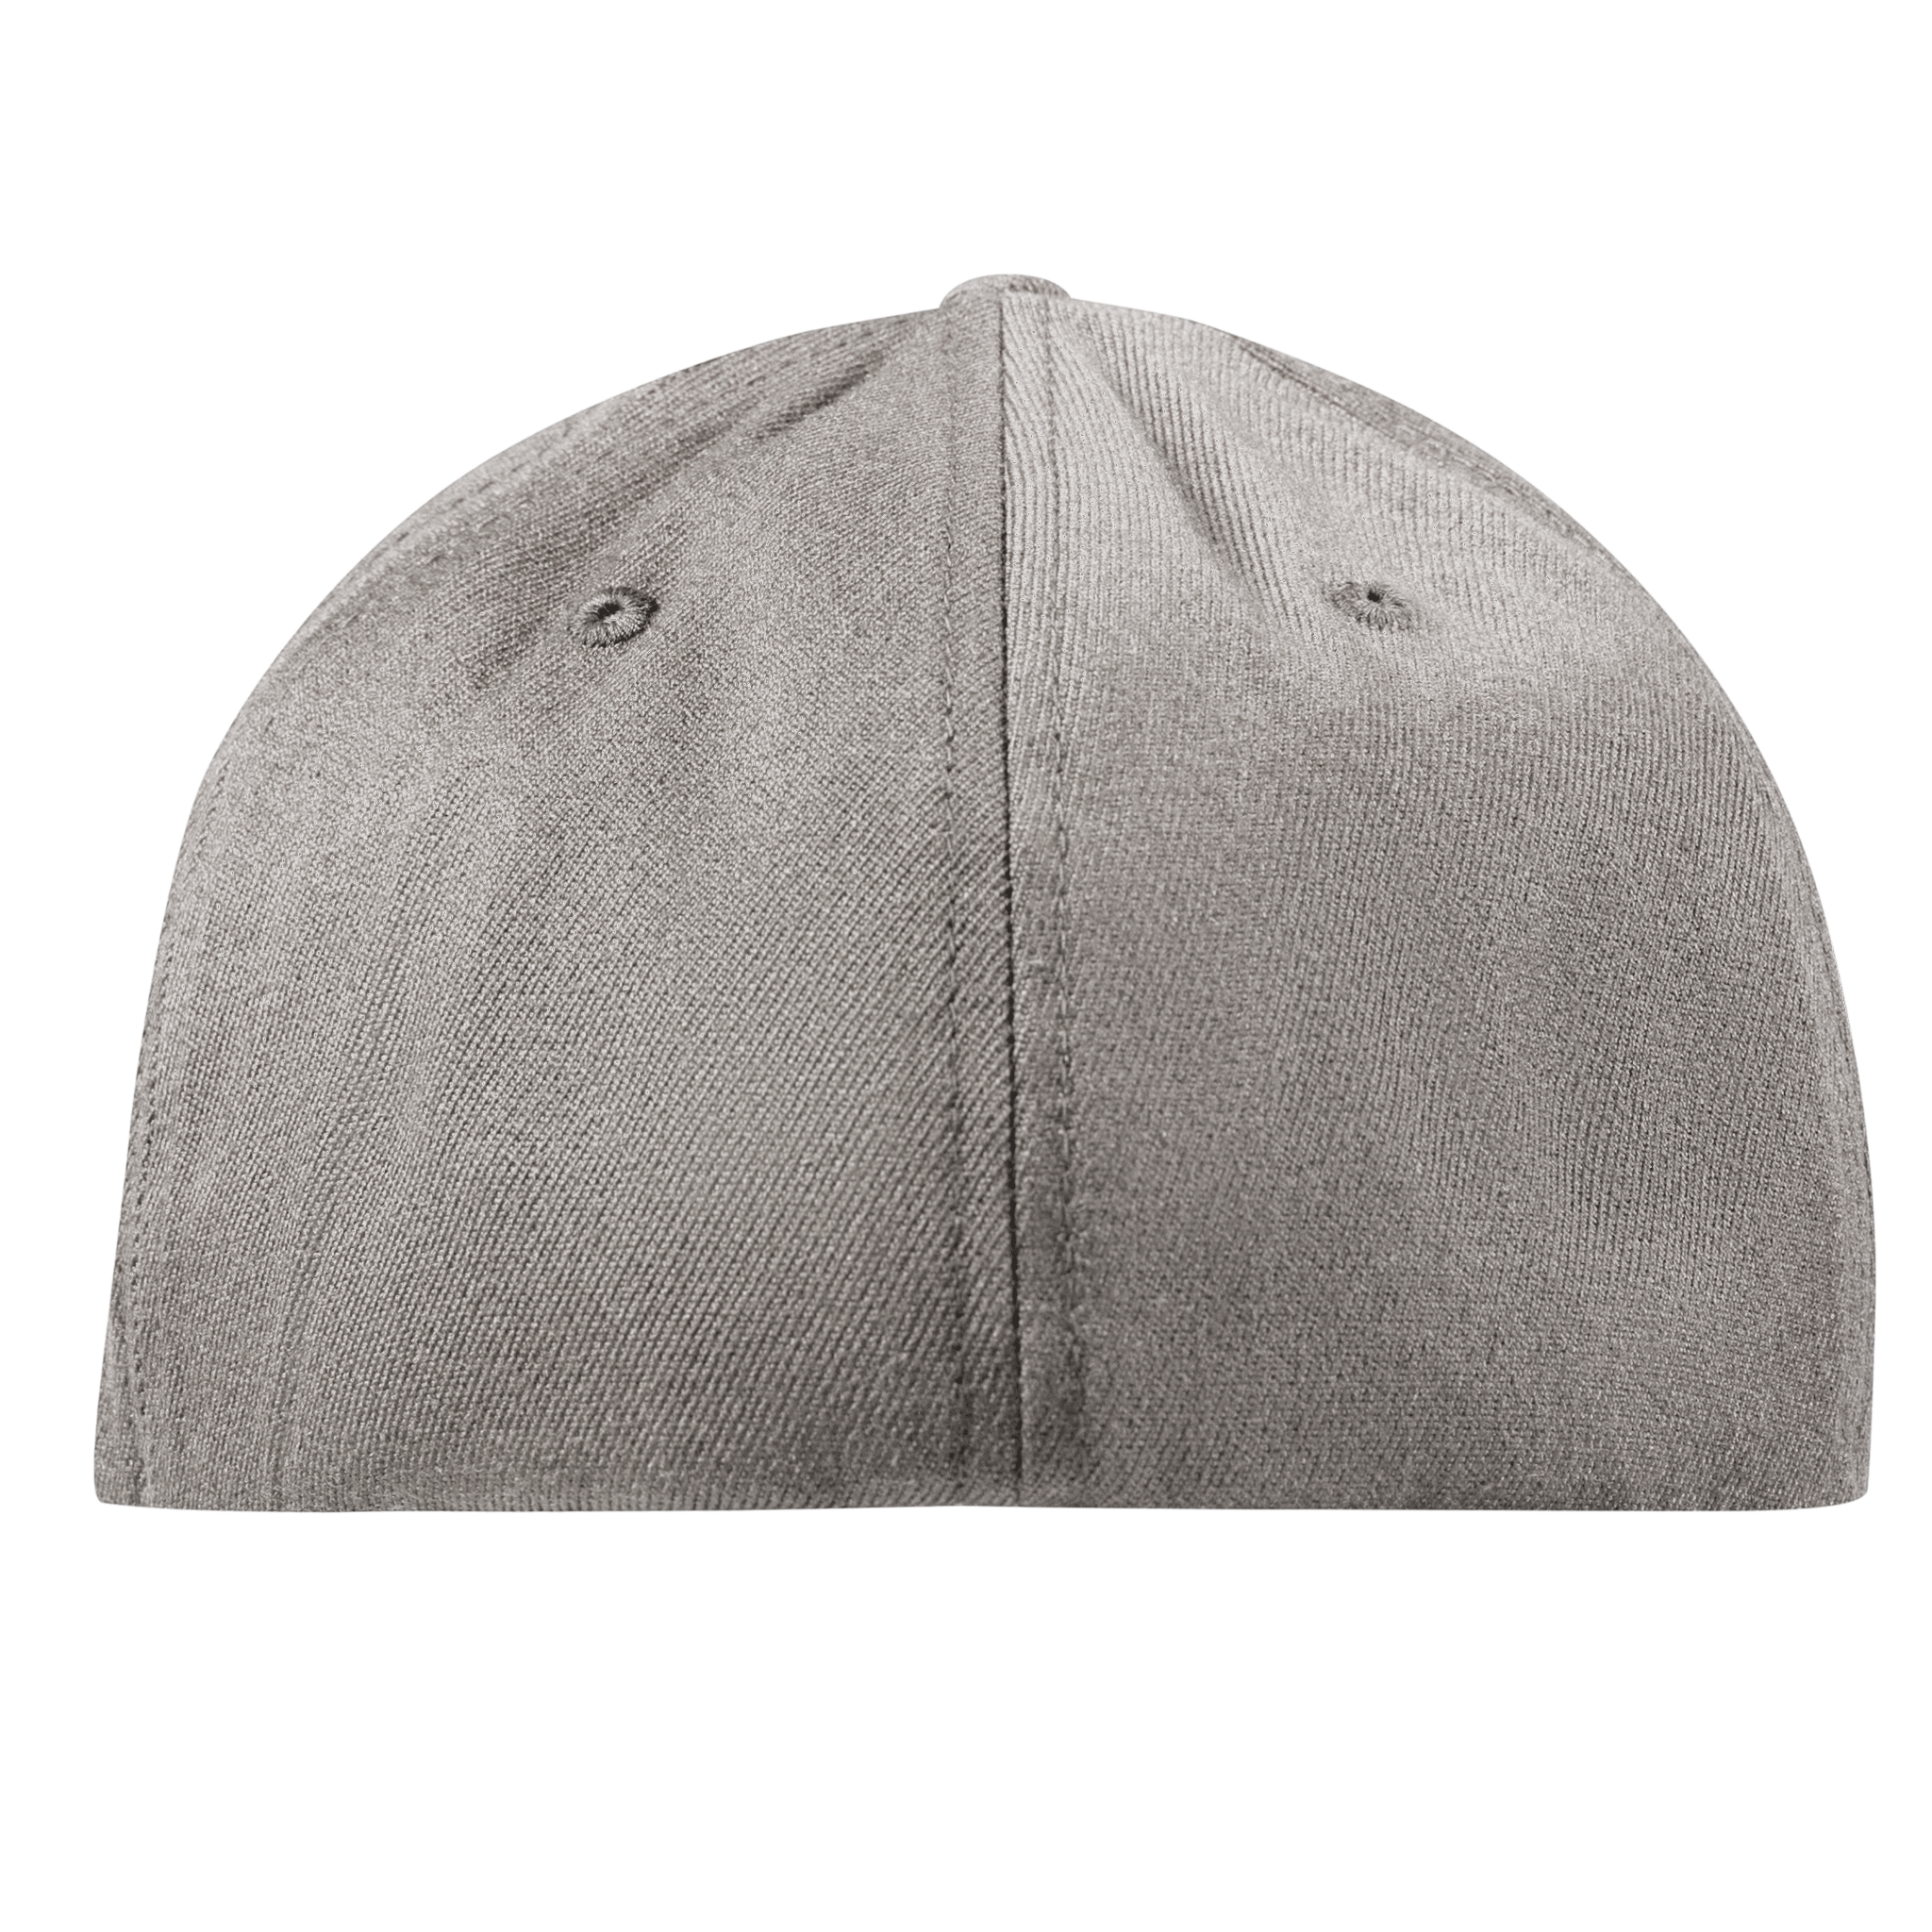 Old Glory Flexfit Fitted Back Heather Gray